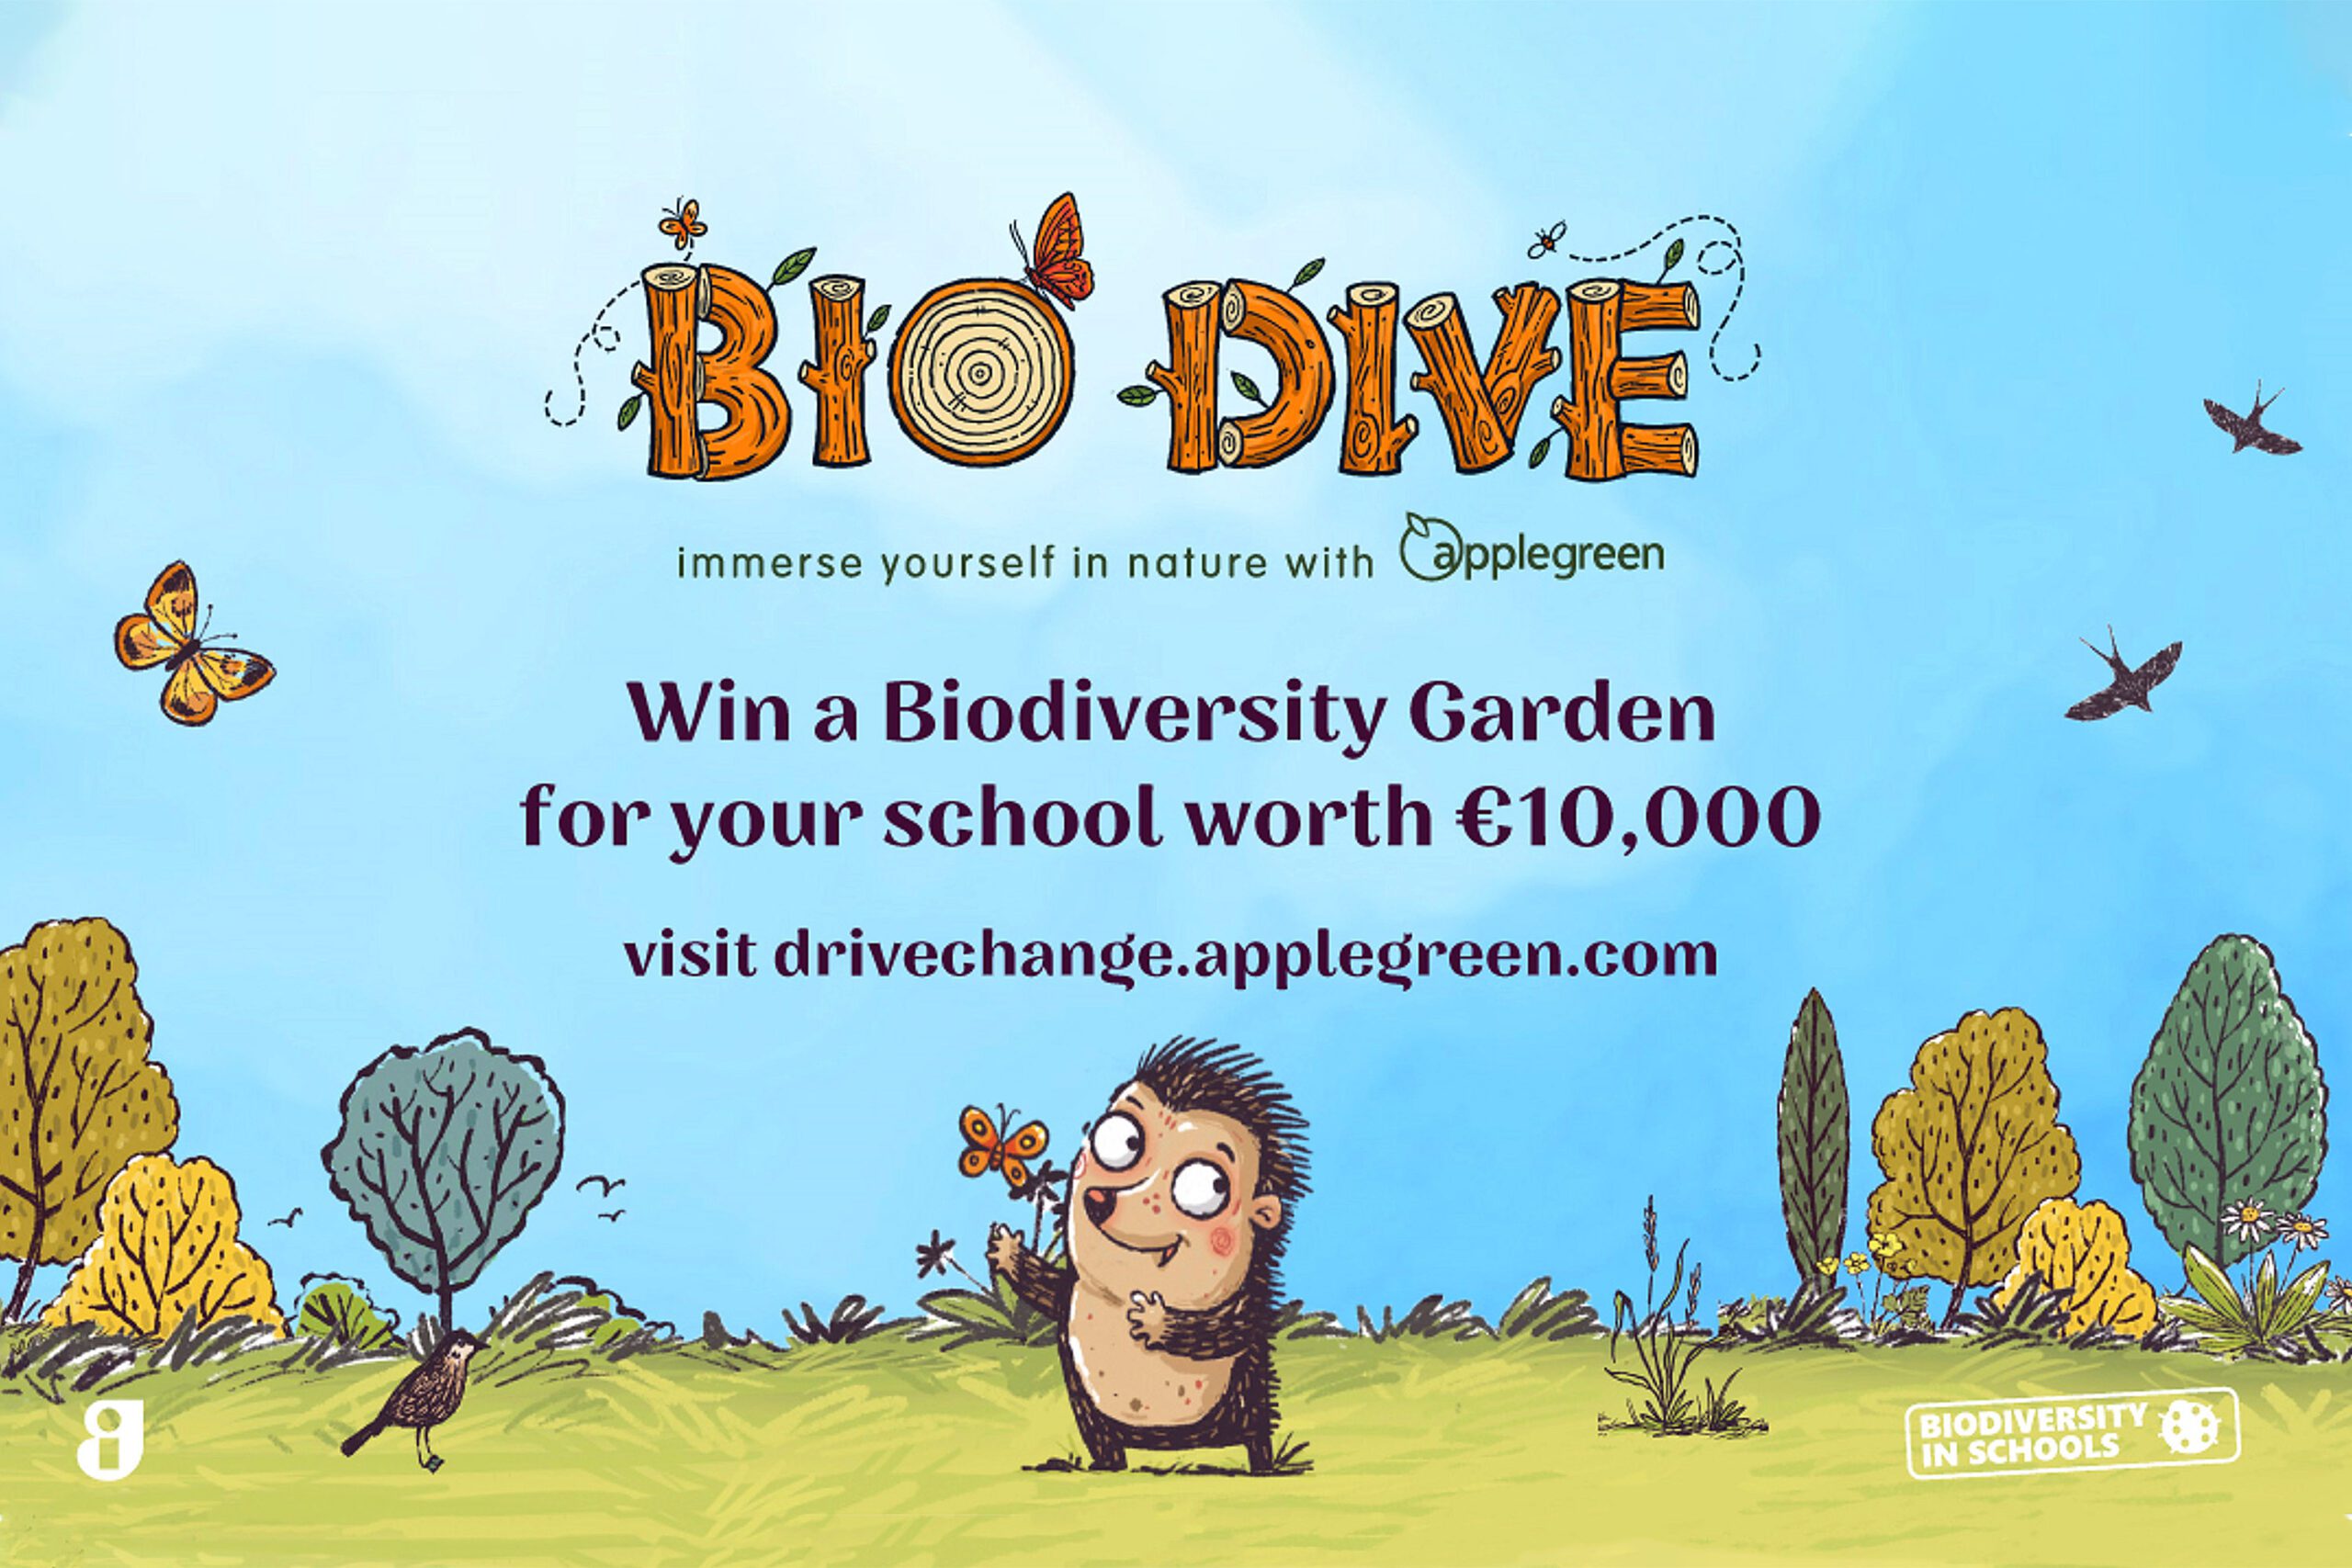 We developed BioDive, a five-month campaign that highlighted the importance of Irish Biodiversity for current and future generations. The key would be interactivity – getting as many schools, teachers, students and families as possible involved and encouraging them to participate by collecting stickers at their local Applegreen outlet.